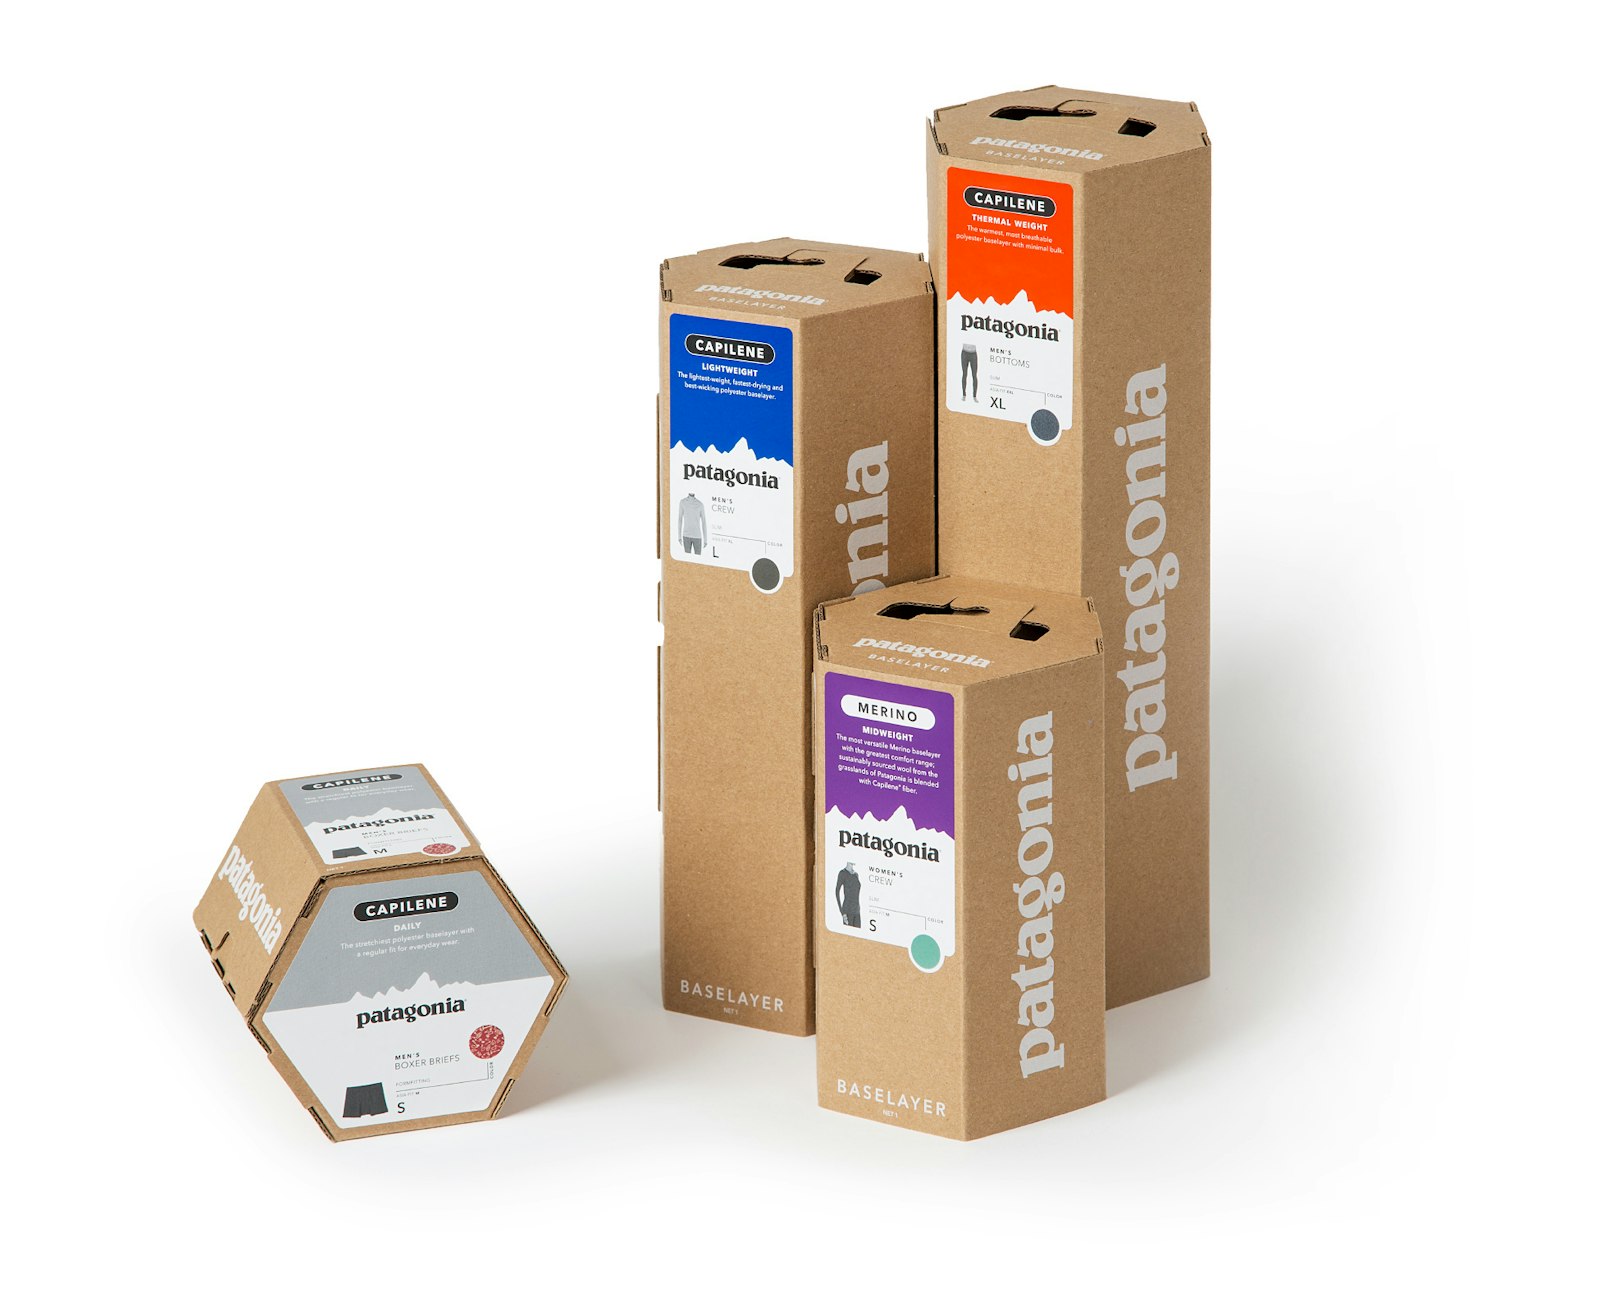 The Patagonia brand packaging design in four craft octagon boxes with white labels.